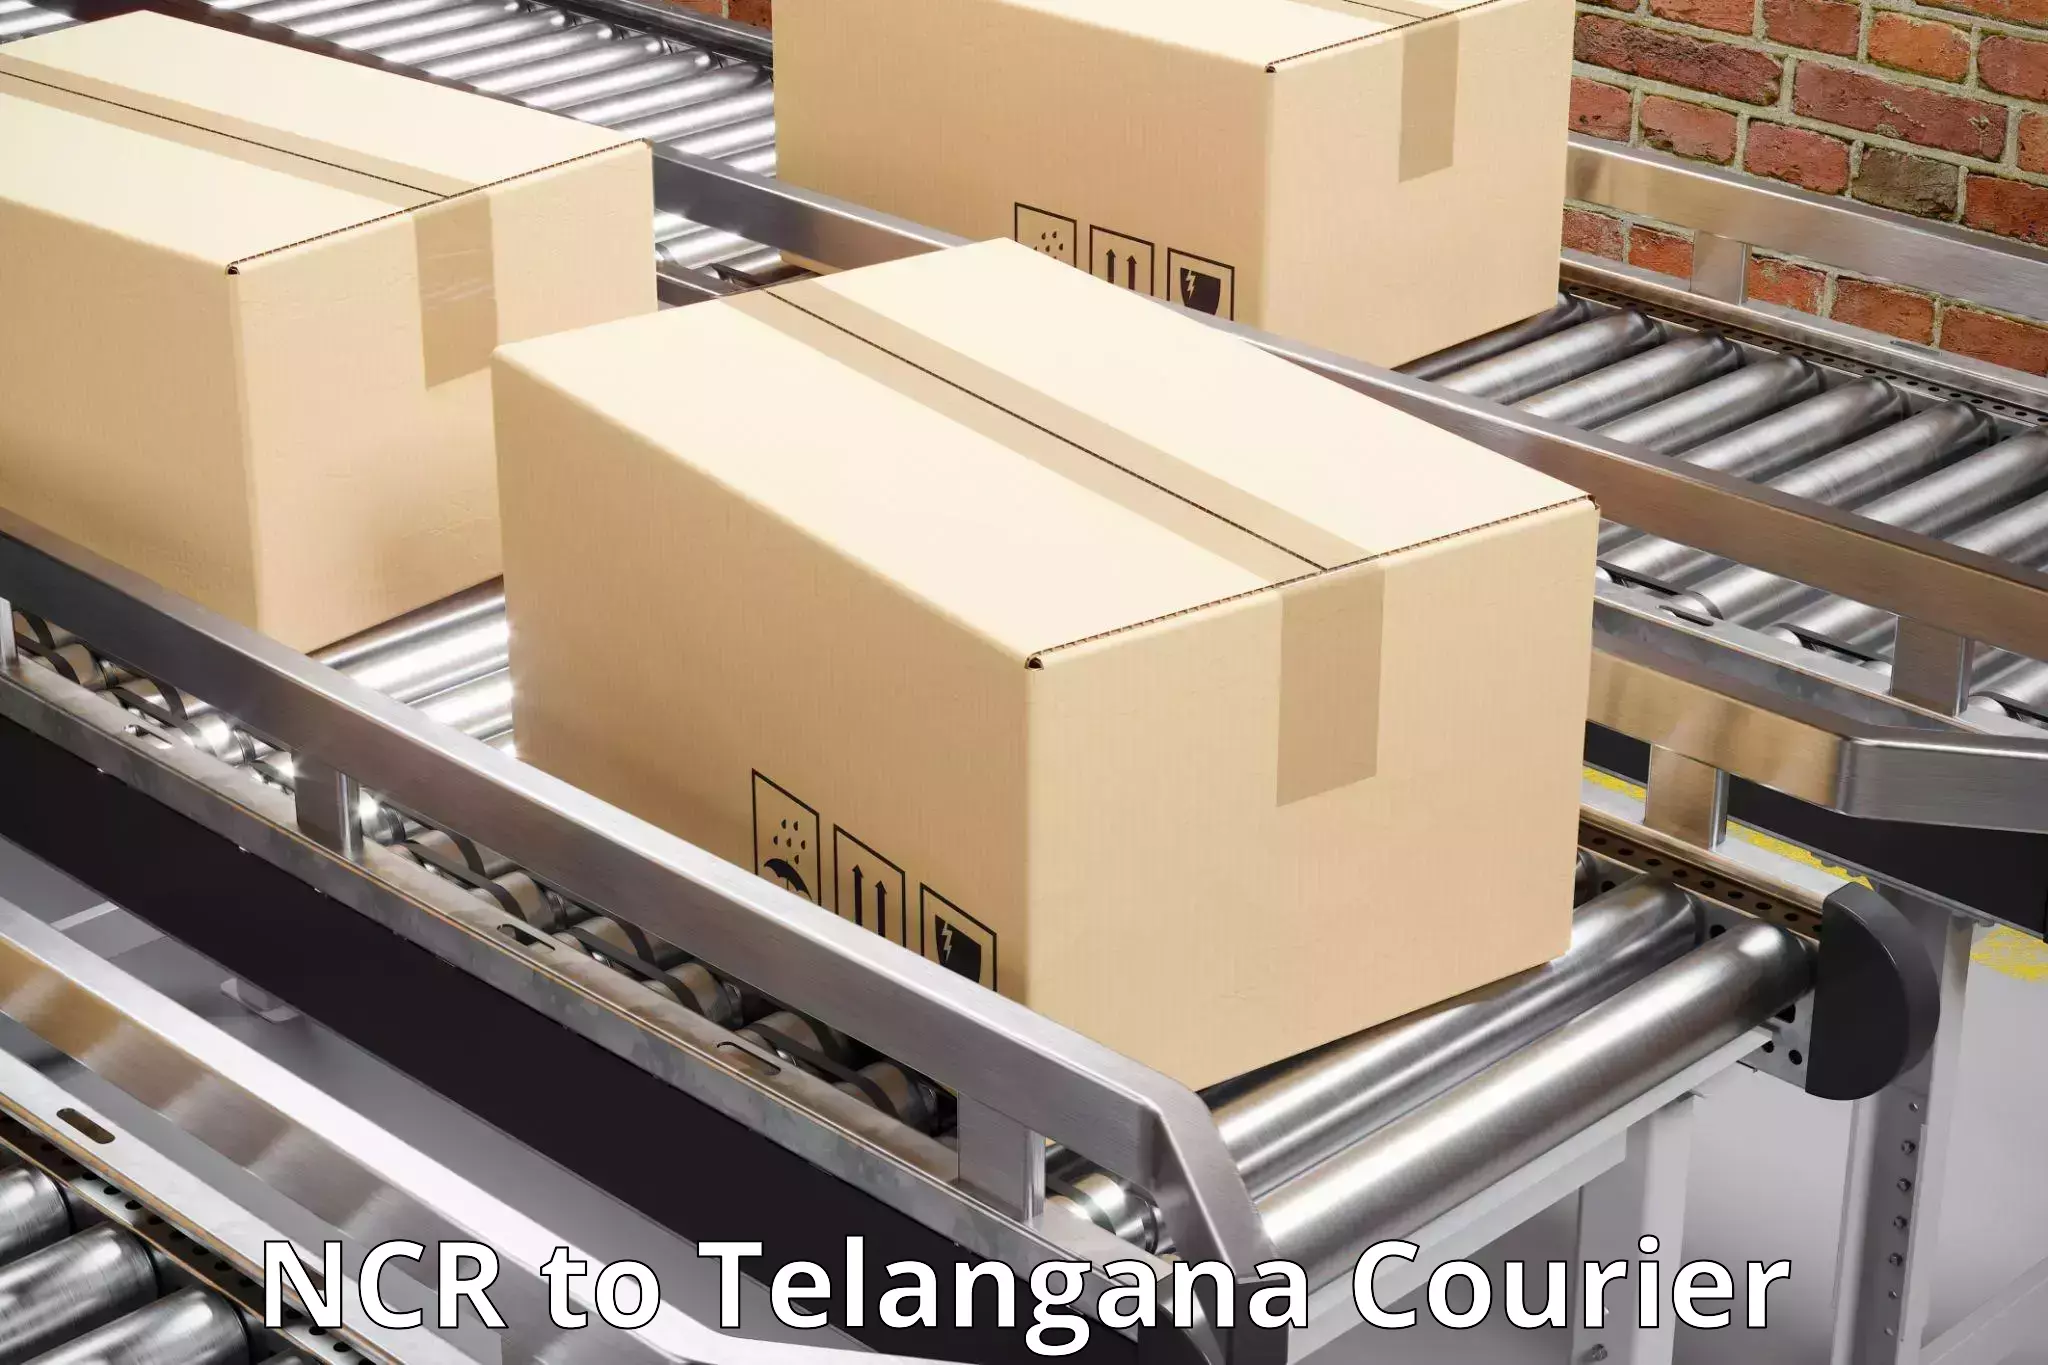 Global courier networks NCR to Hyderabad